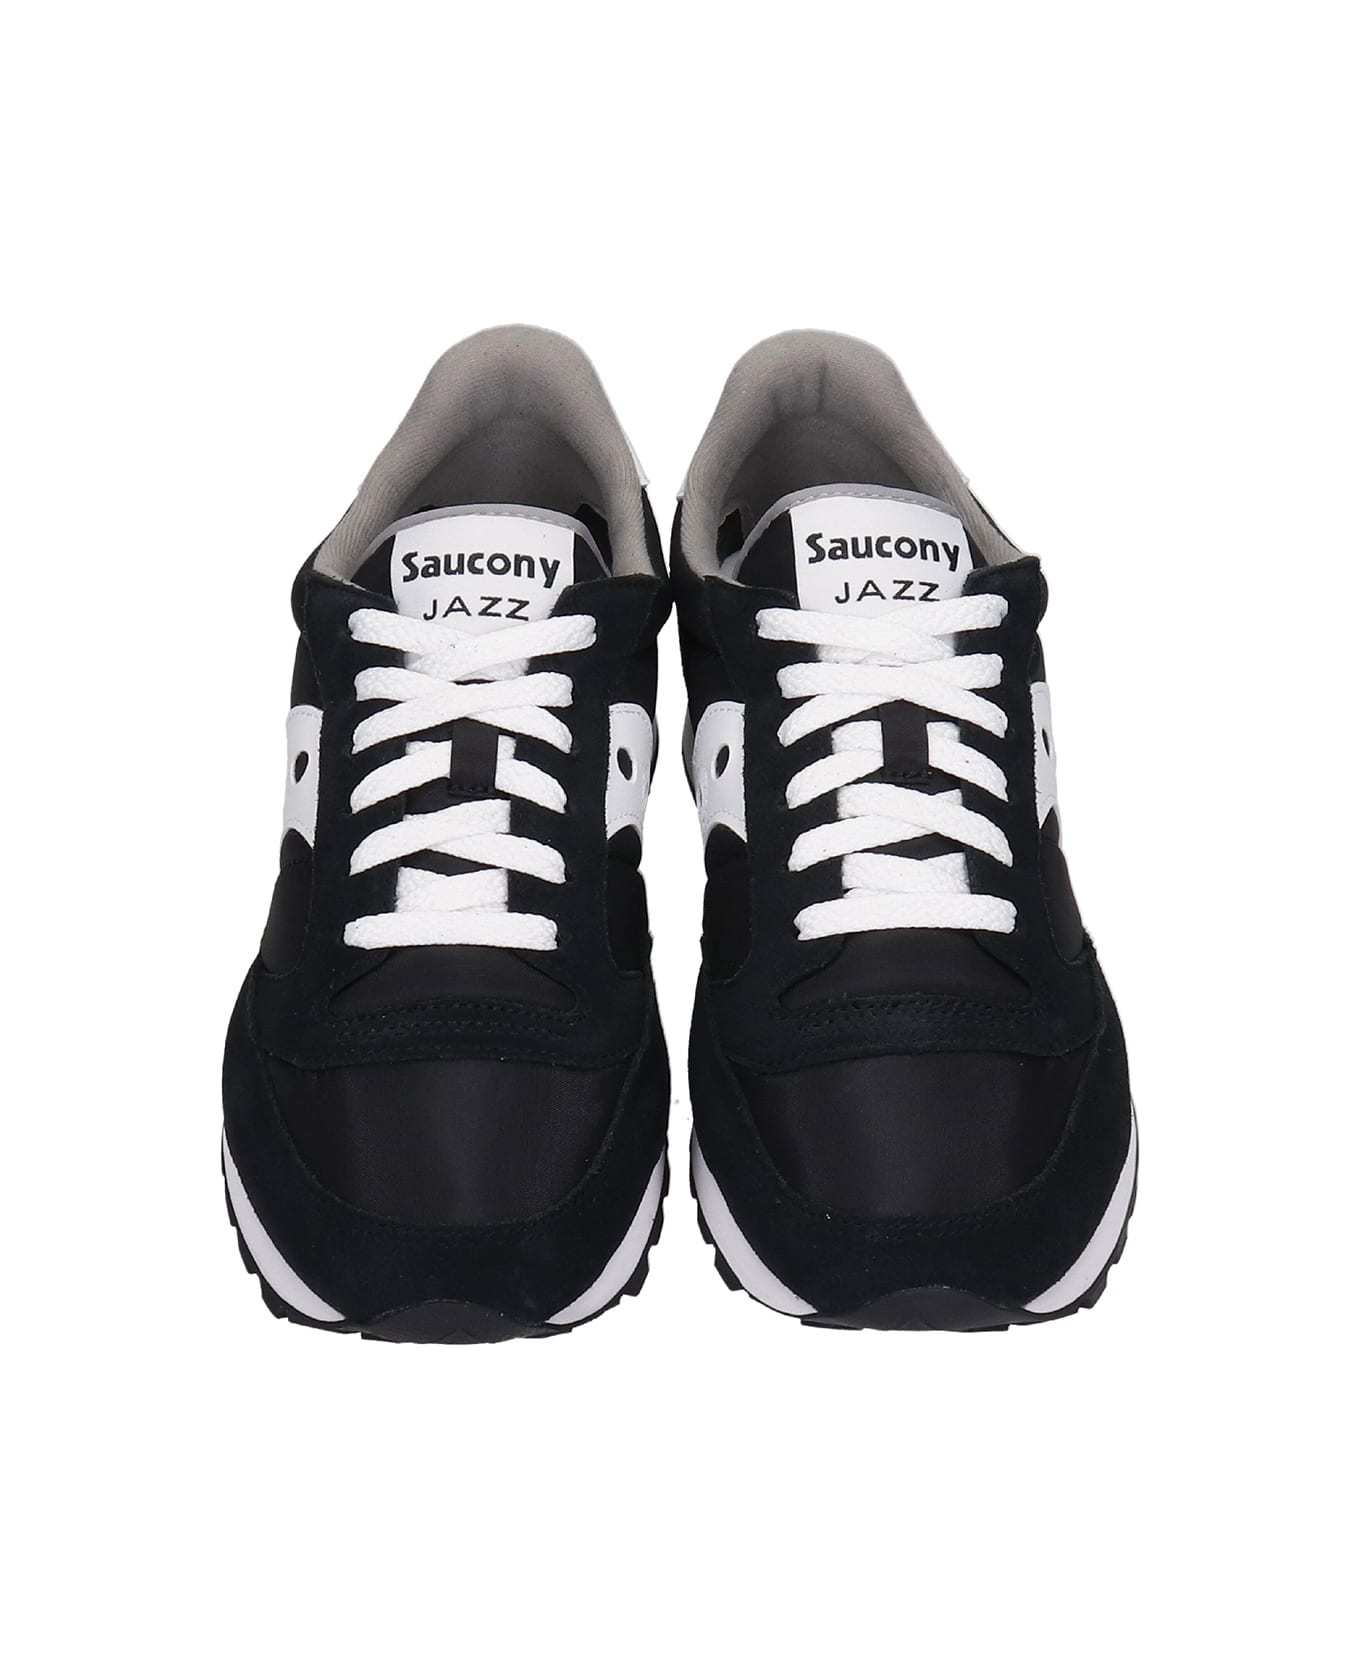 Saucony Jazz Original Sneakers In Black Suede And Fabric - Blk/wht